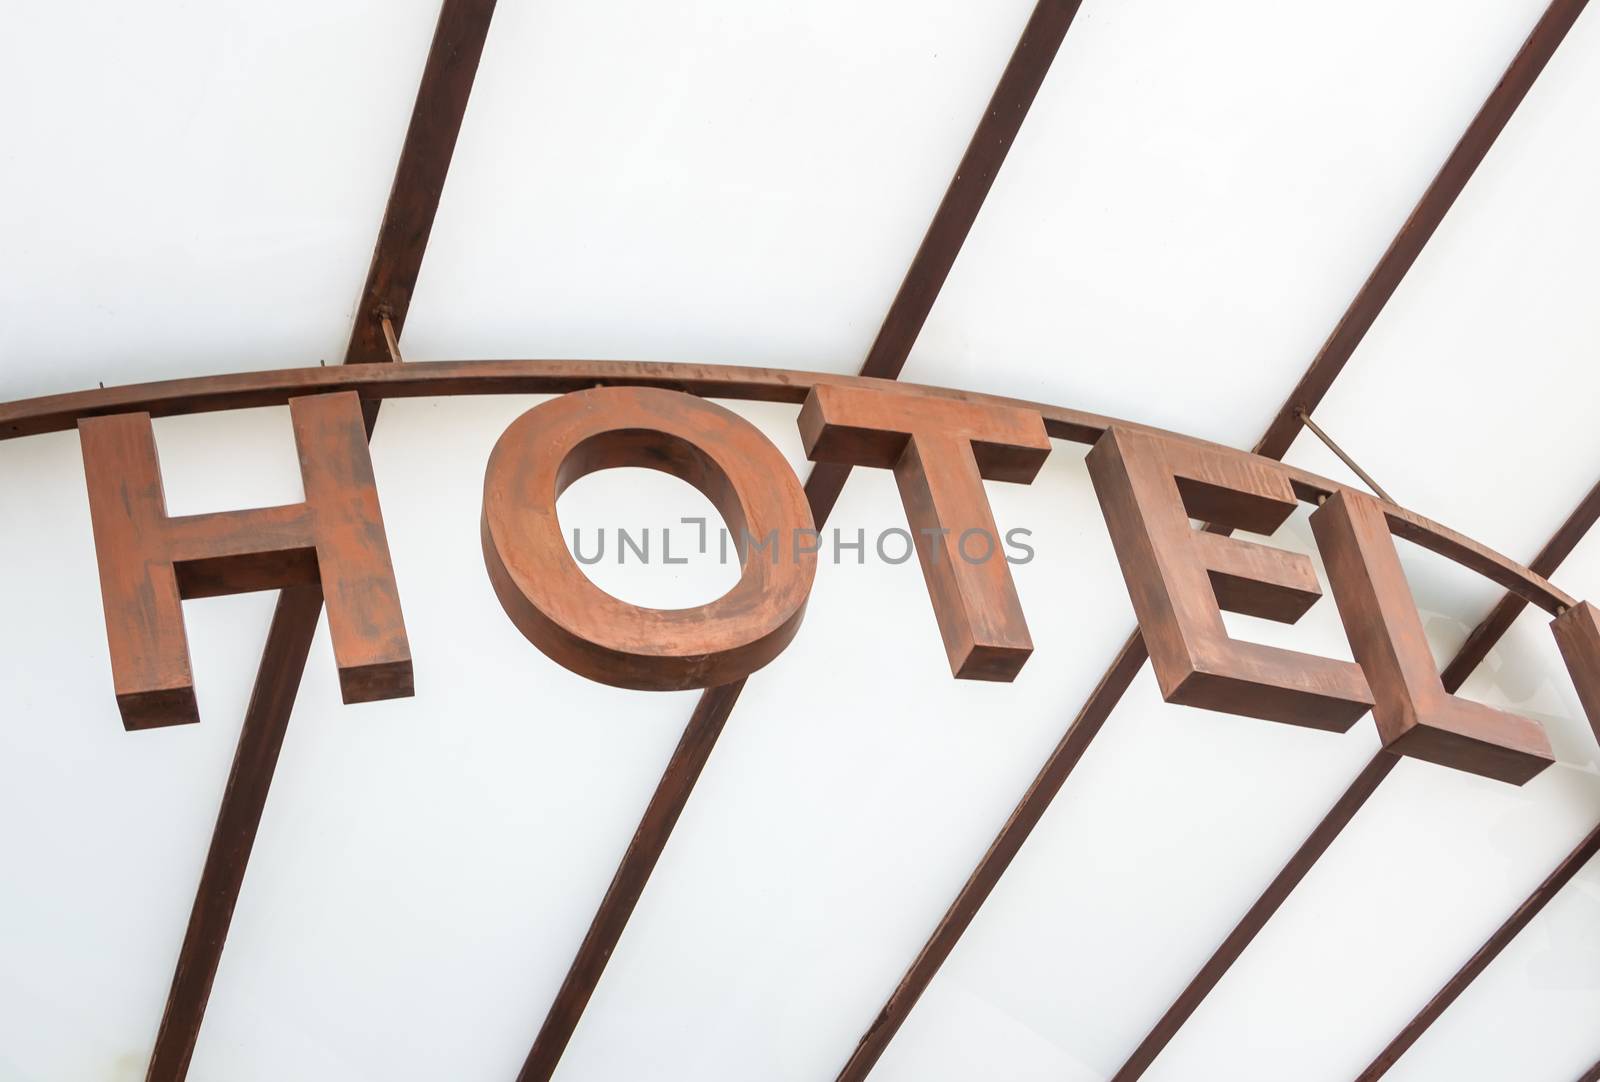 Modern hotel sign over glass canopy entrance by doble.d